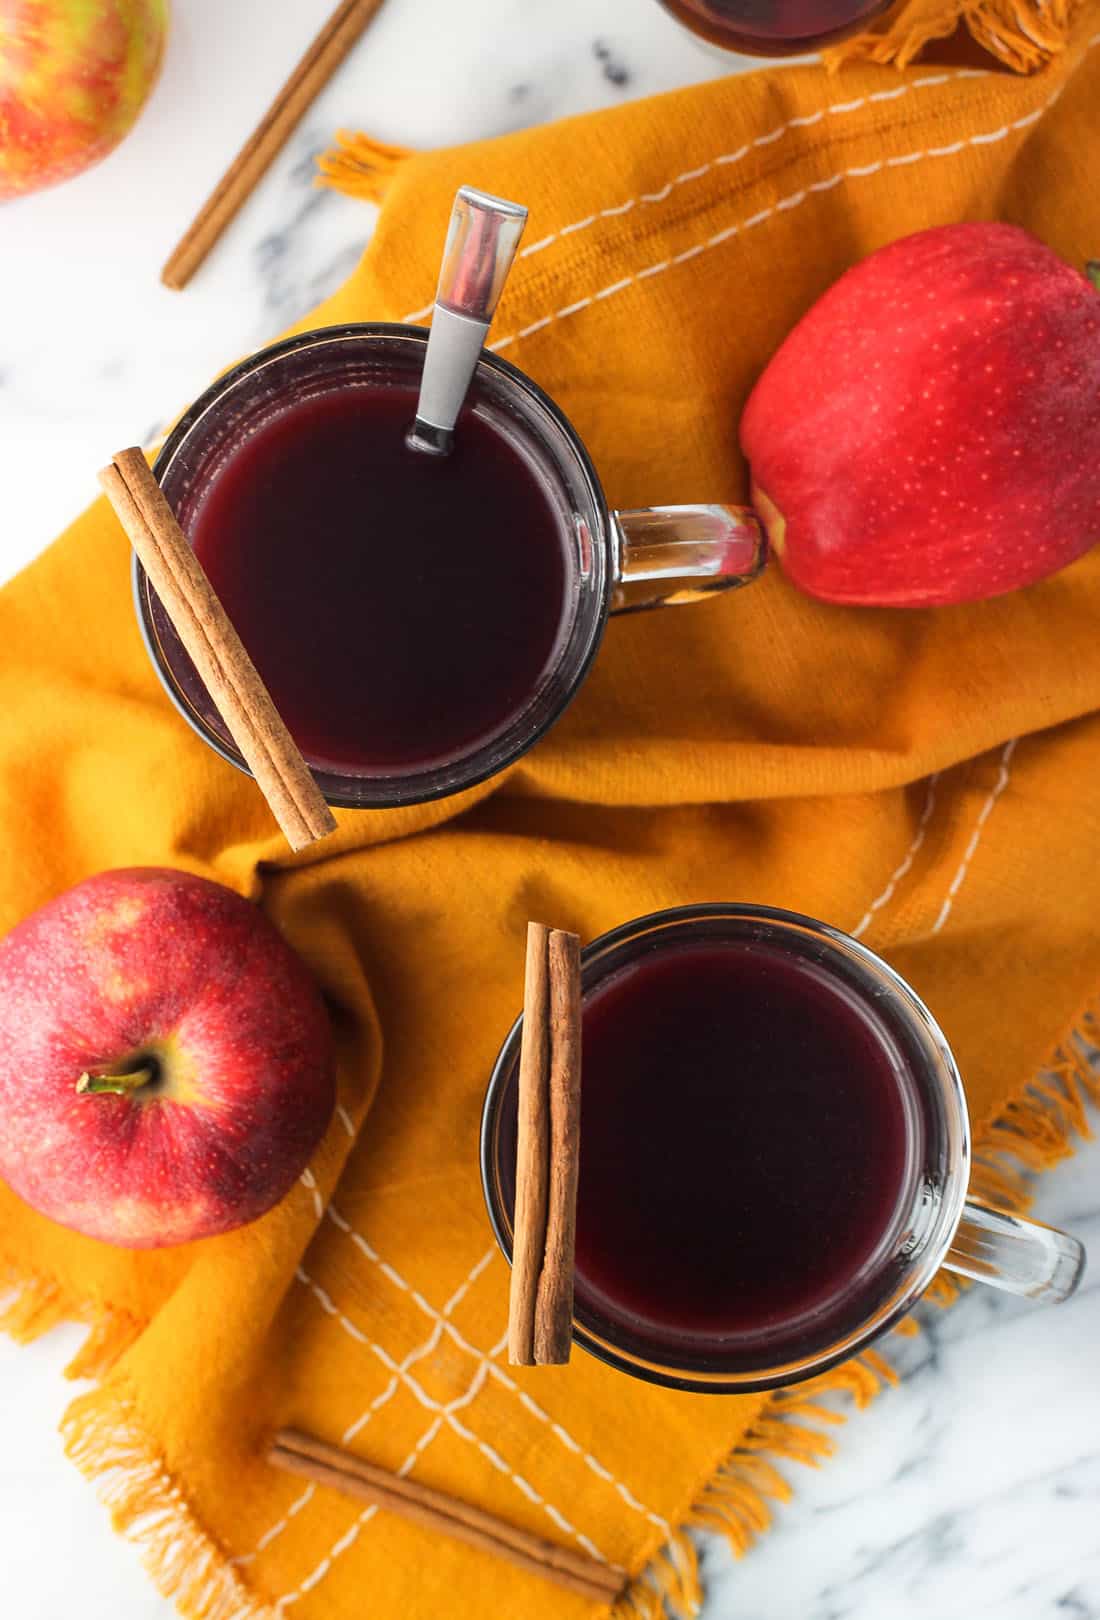 An overhead picture of two mugs of mulled wine garnished with cinnamon sticks. There are fresh apples next to the mugs and one mug has a spoon in it